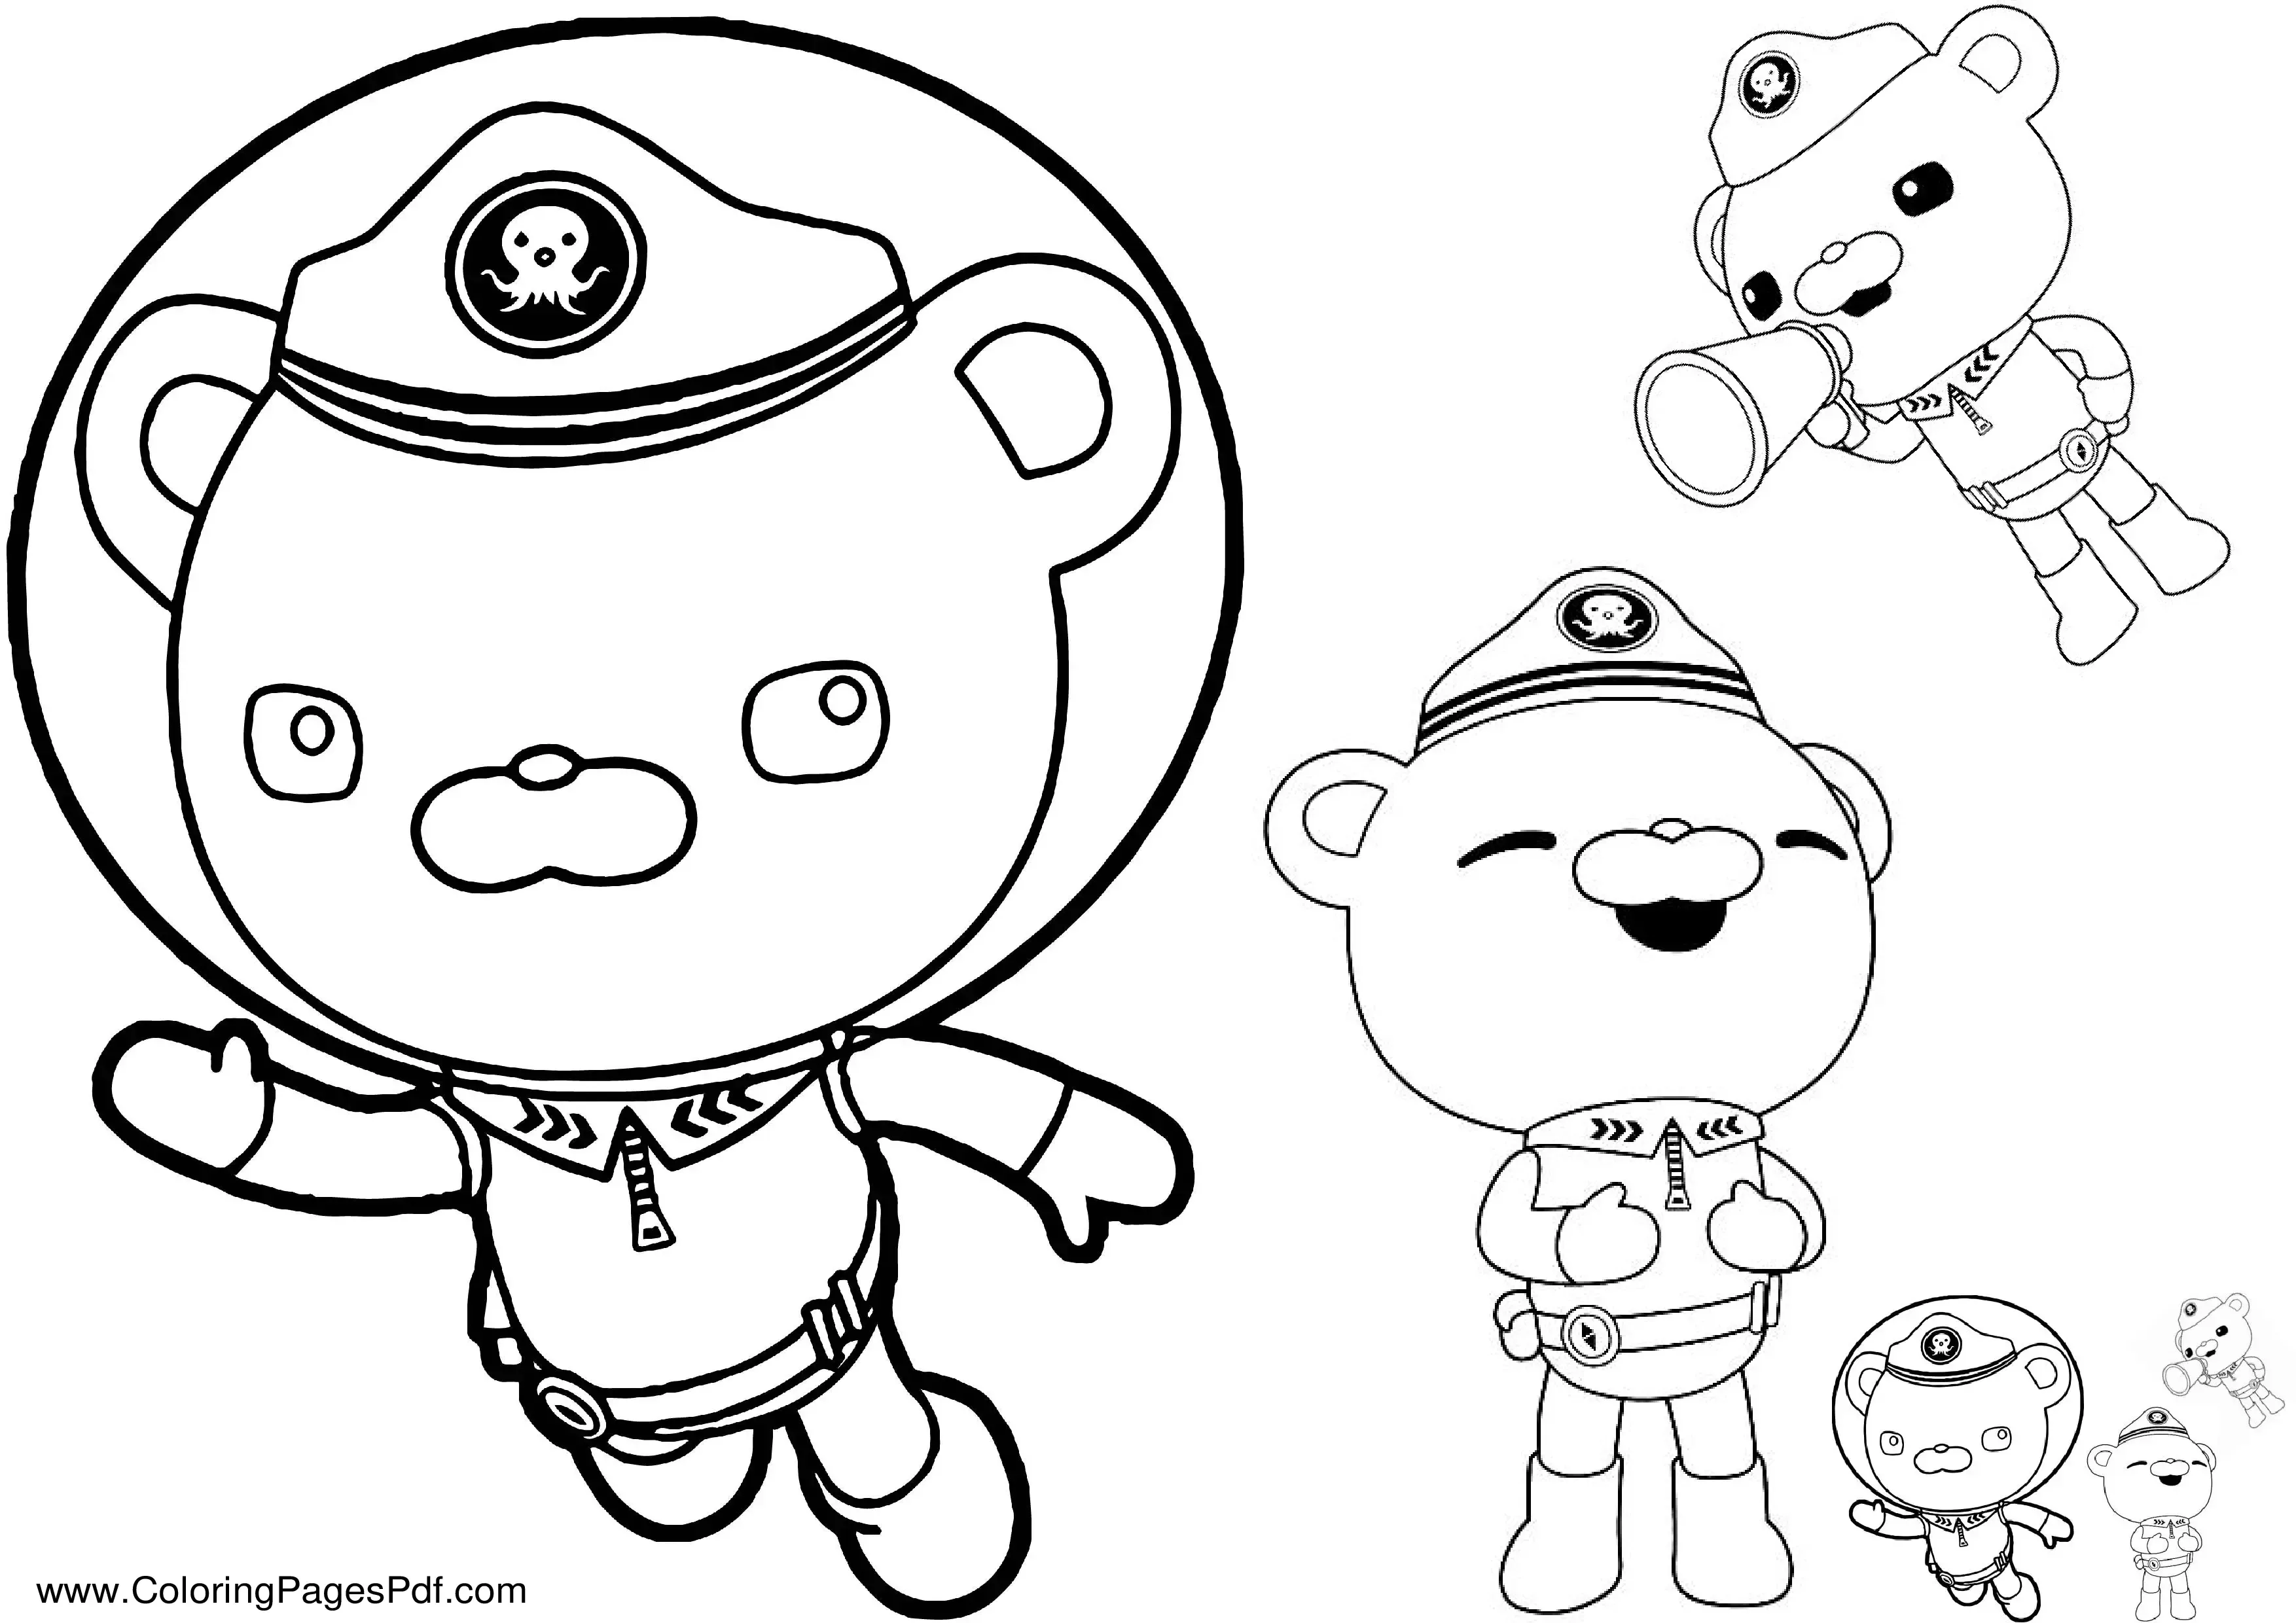 Captain Barnacles coloring Page